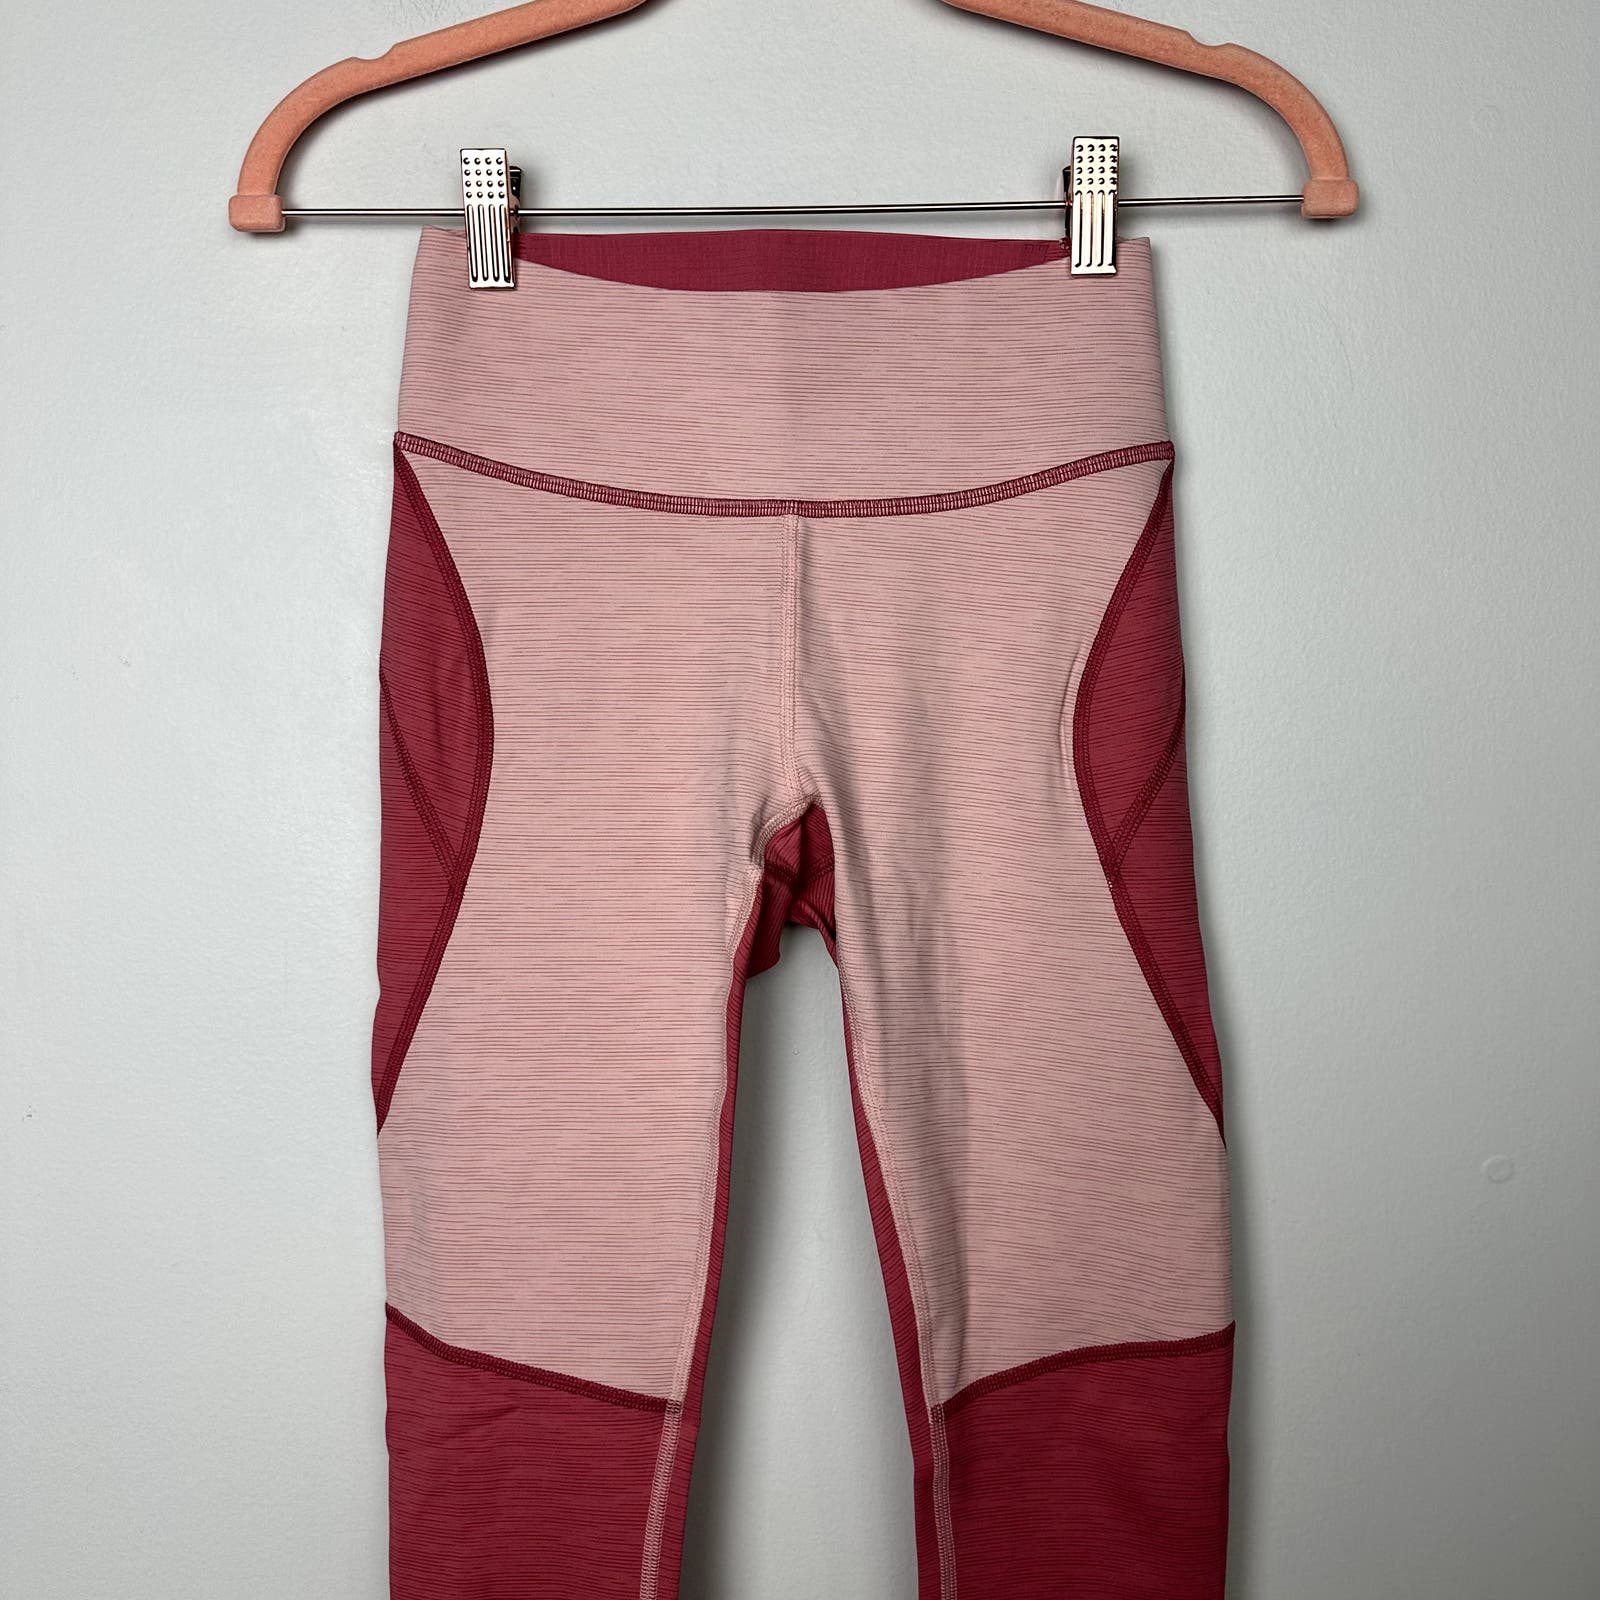 Outdoor Voices NWT Thistle TechSweat Core 3/4 Leggings Size XS